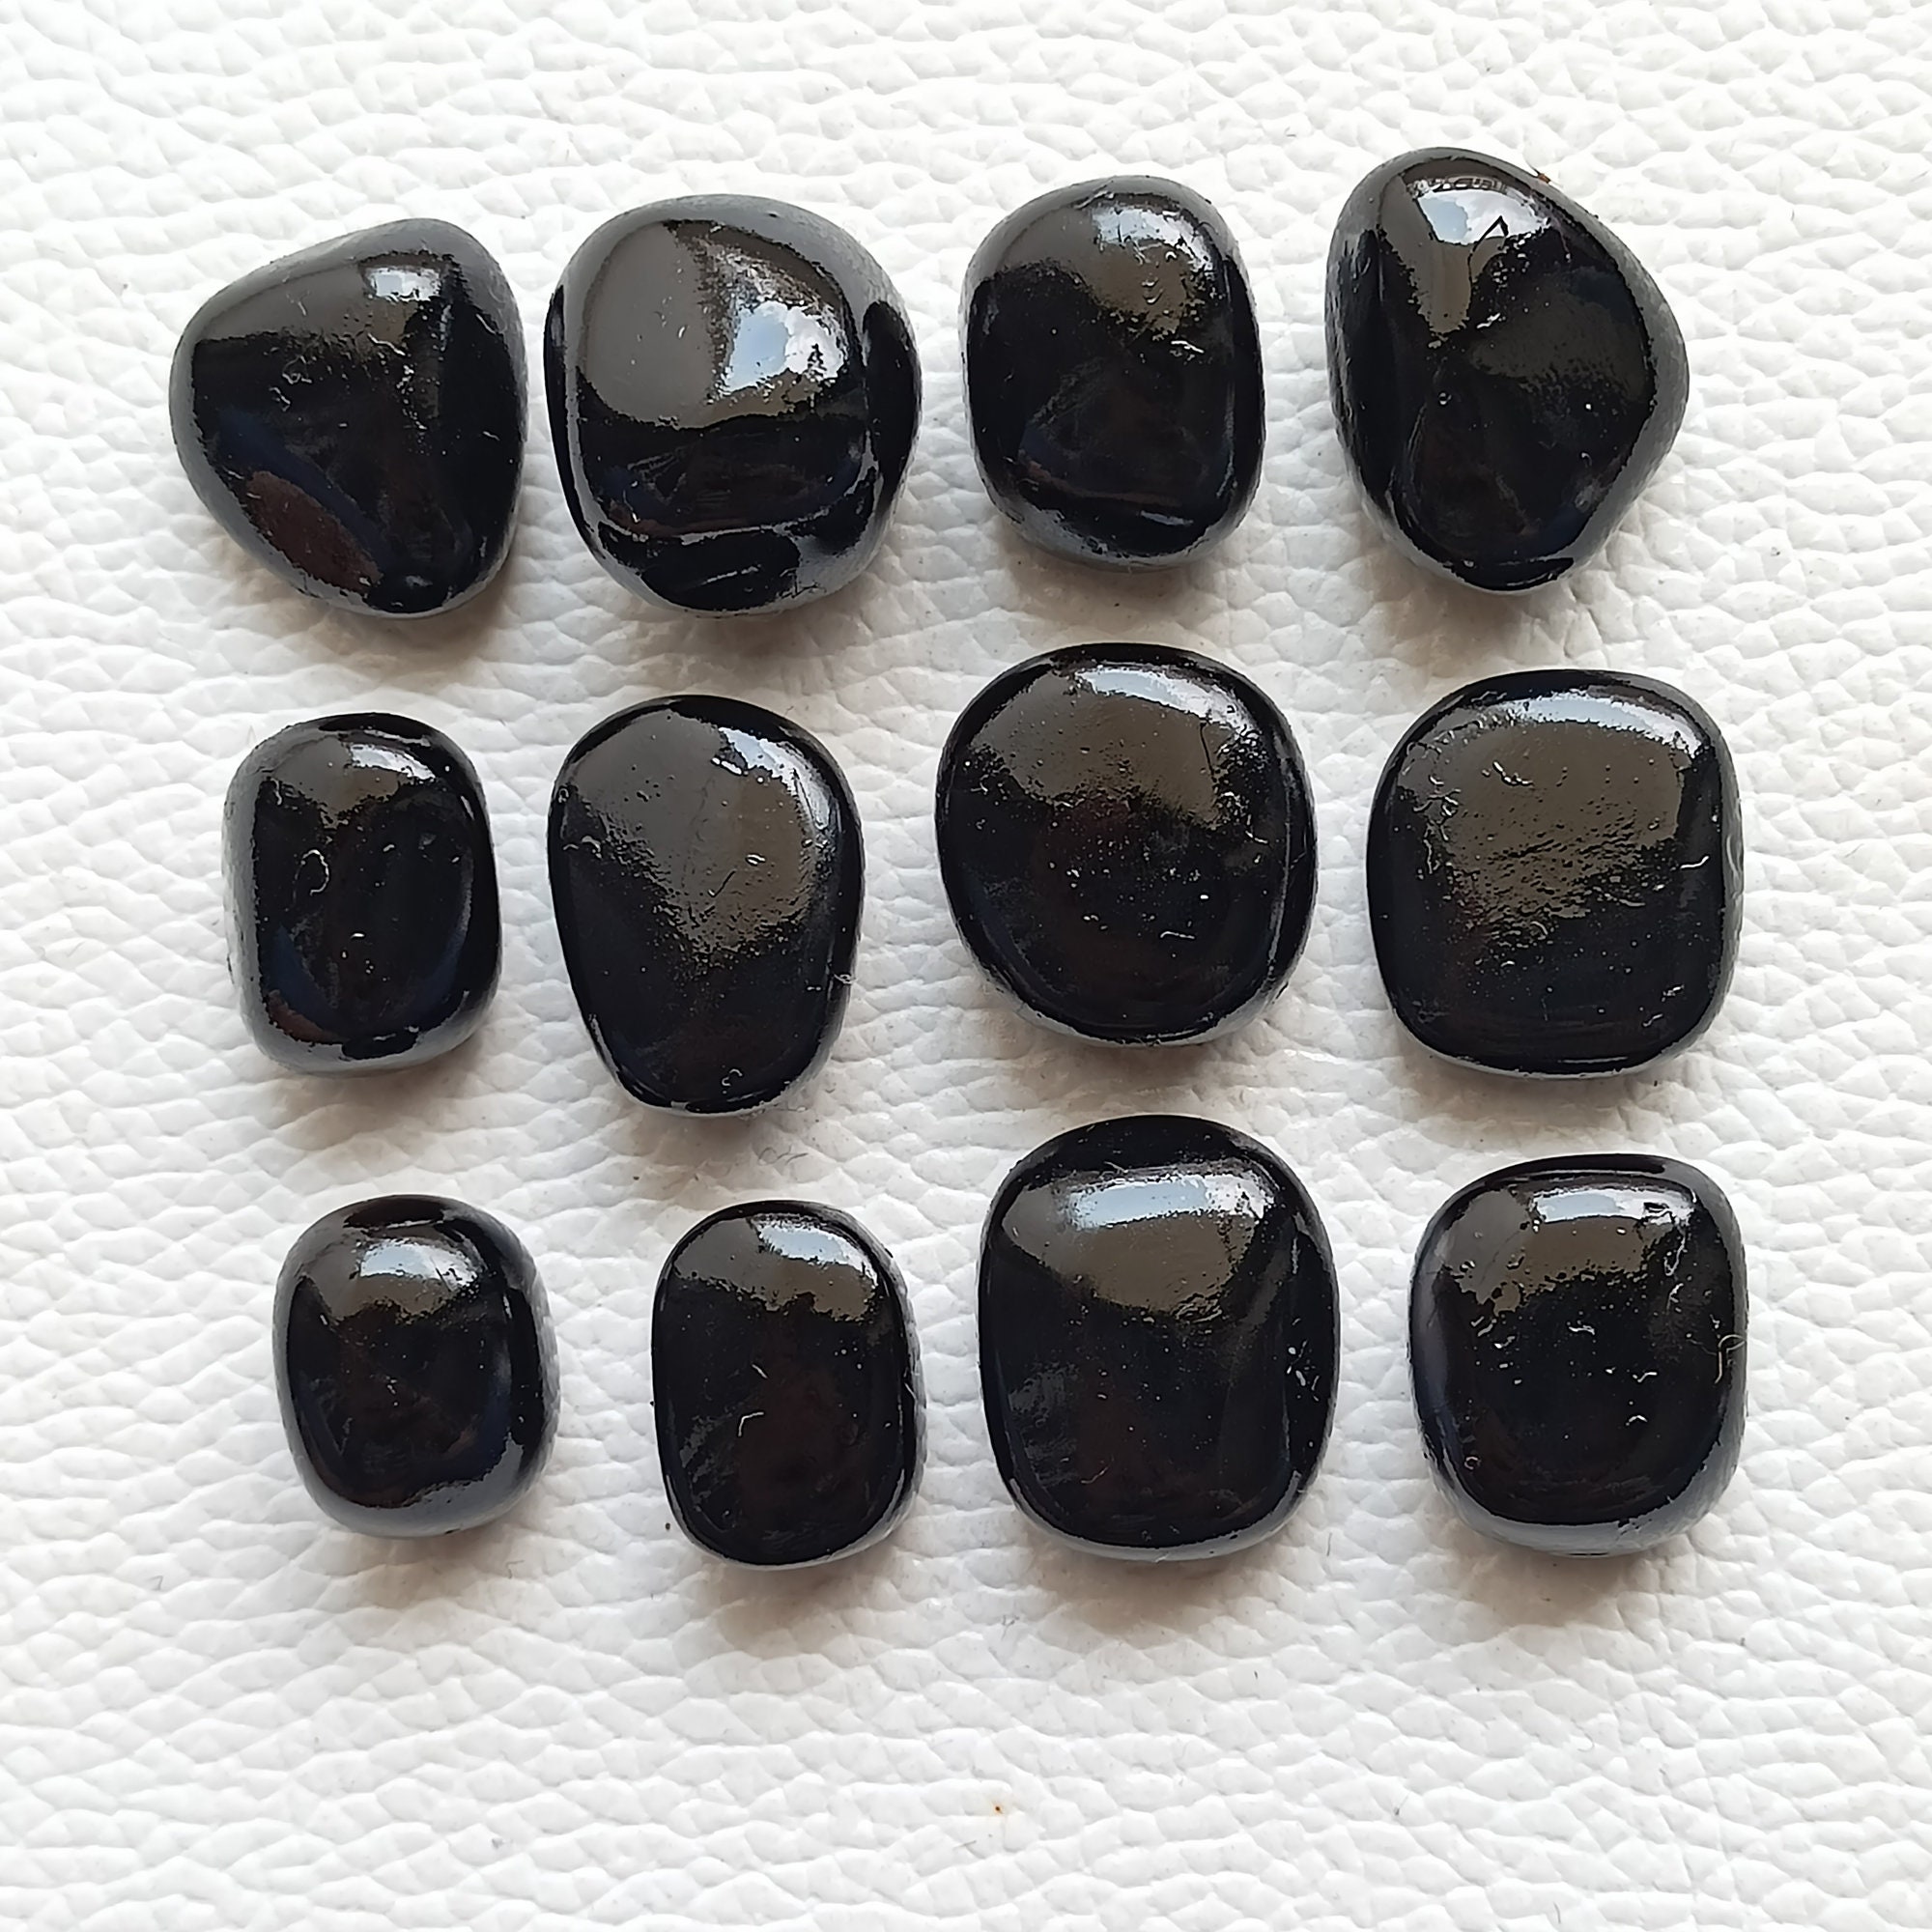 Tumbled Black Onyx - Wholesale Stones, Minerals, Crystals, and Gems from  SoulMakes – Soulmakes Wholesale